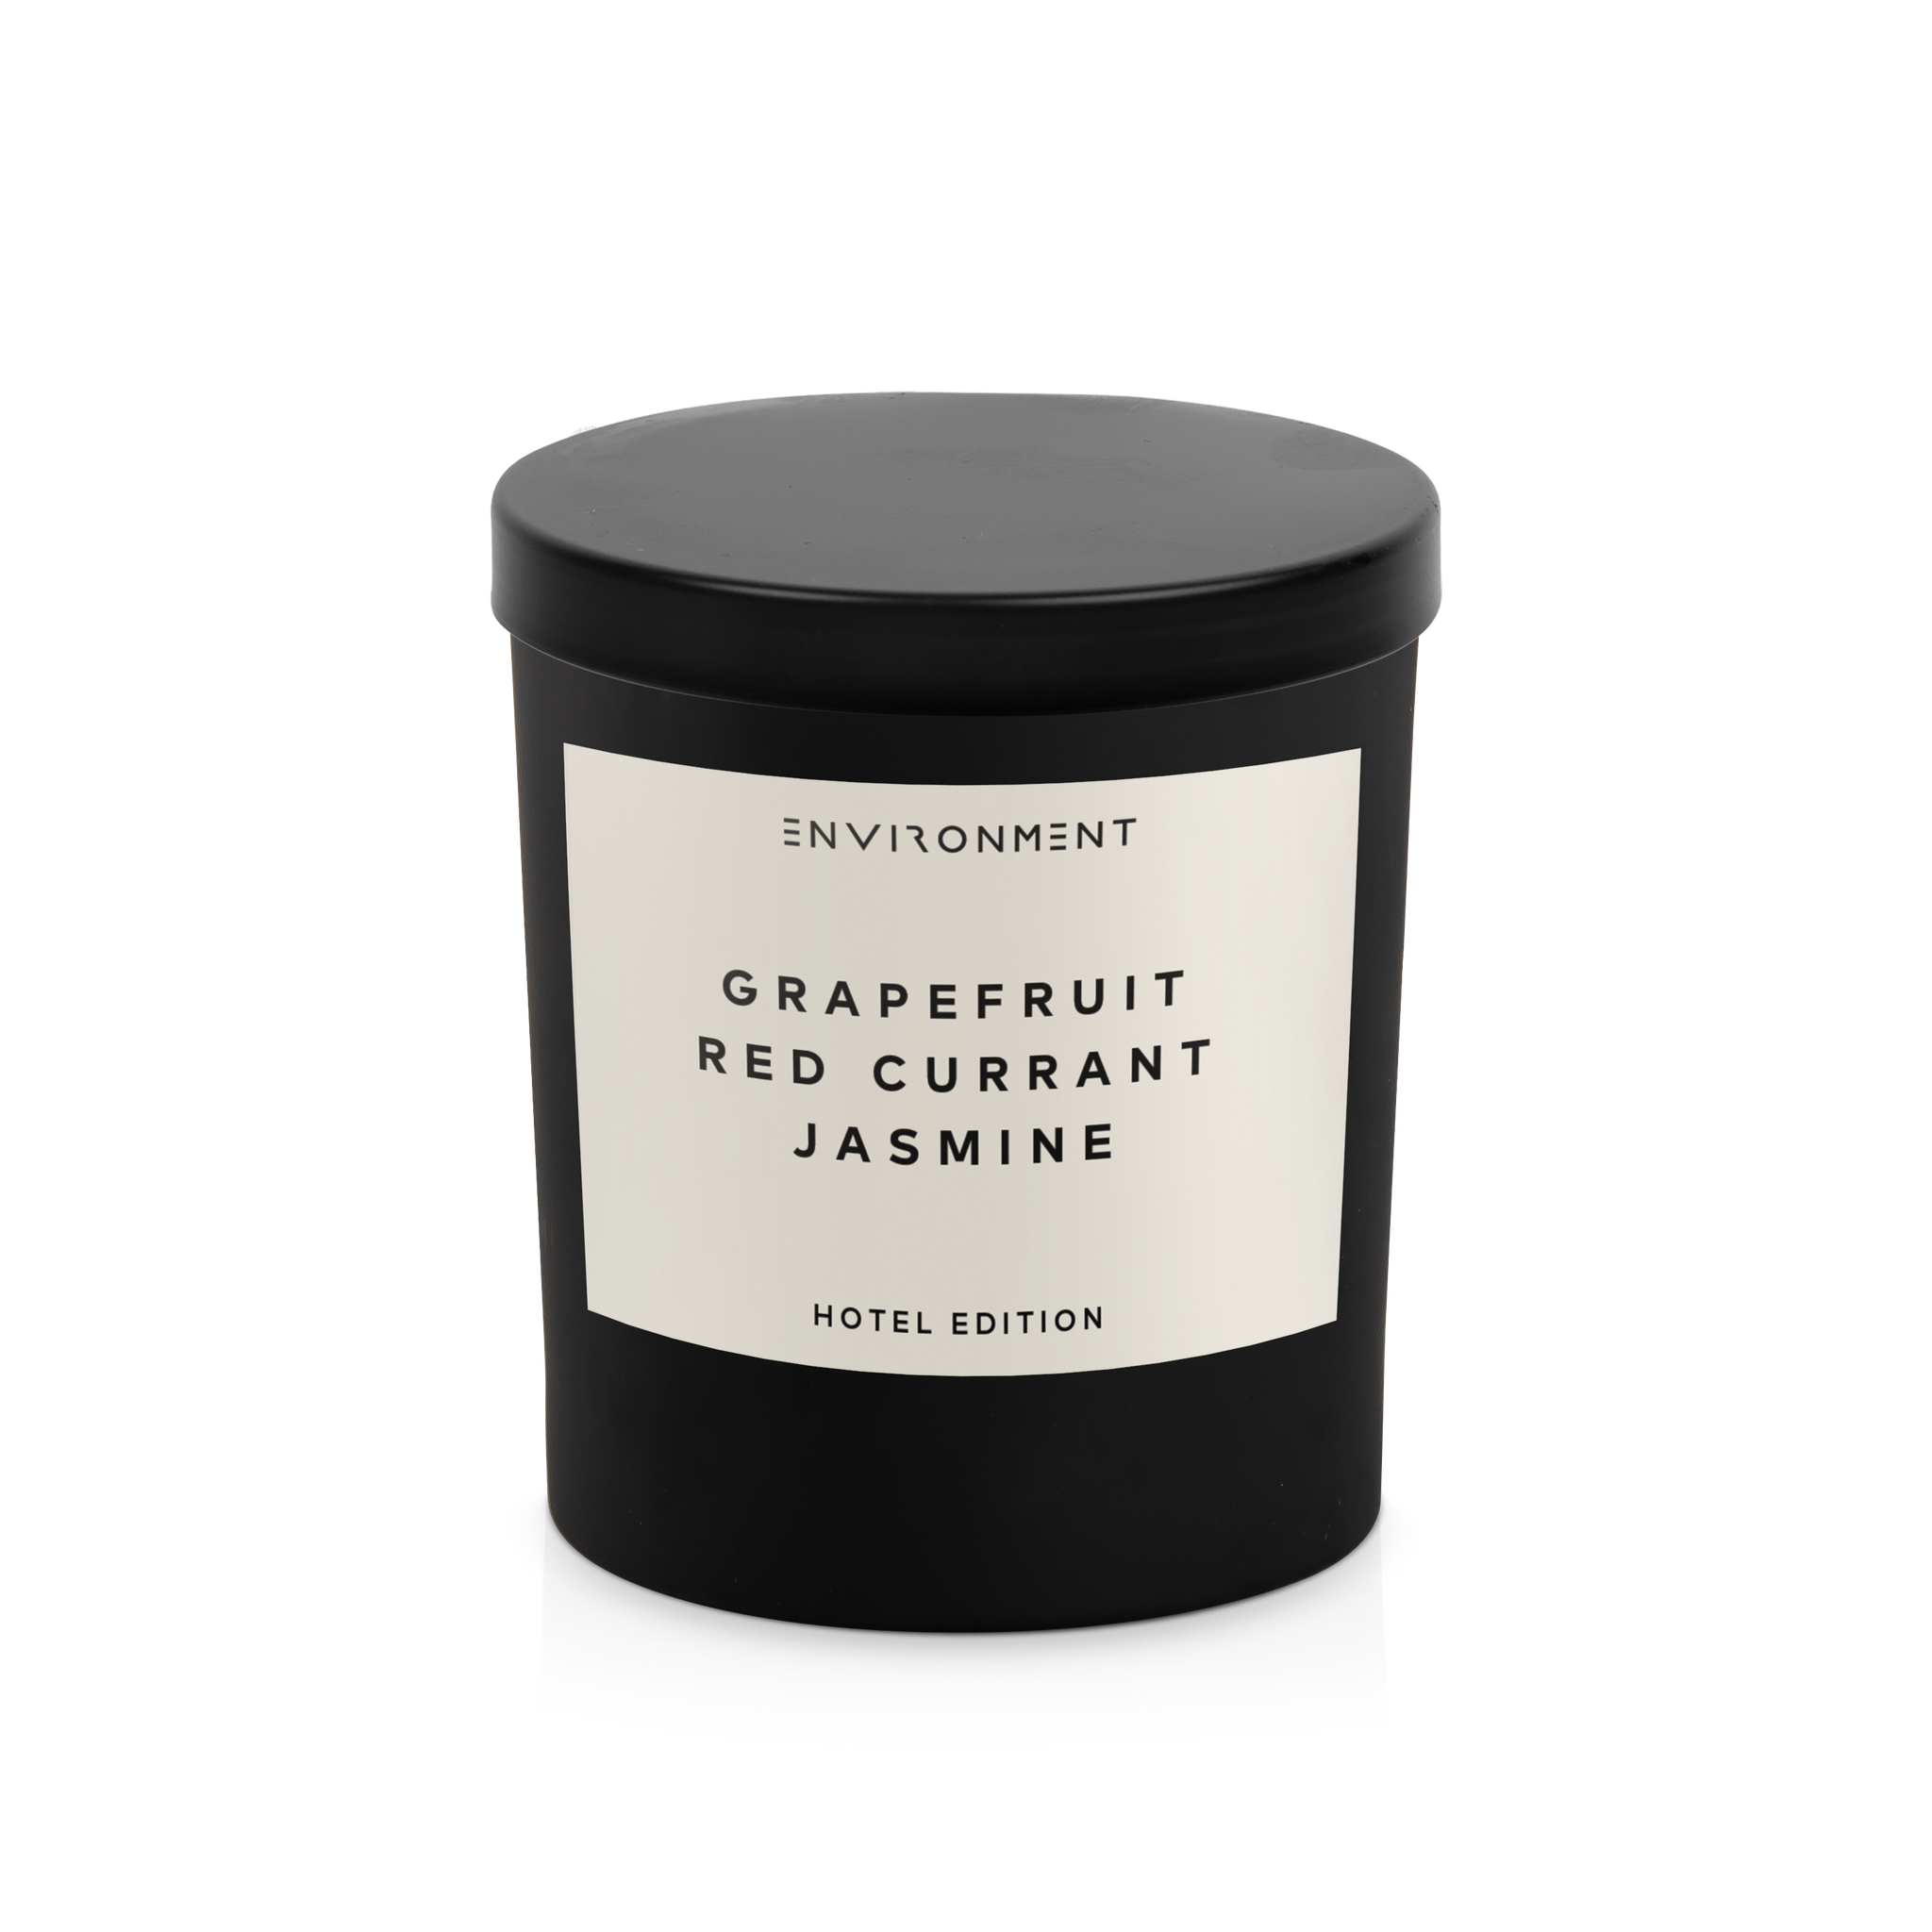 Grapefruit | Red Currant | Jasmine 200ml Diffuser and 8oz Candle Gift Pack (Inspired by Marriott Hotel®)